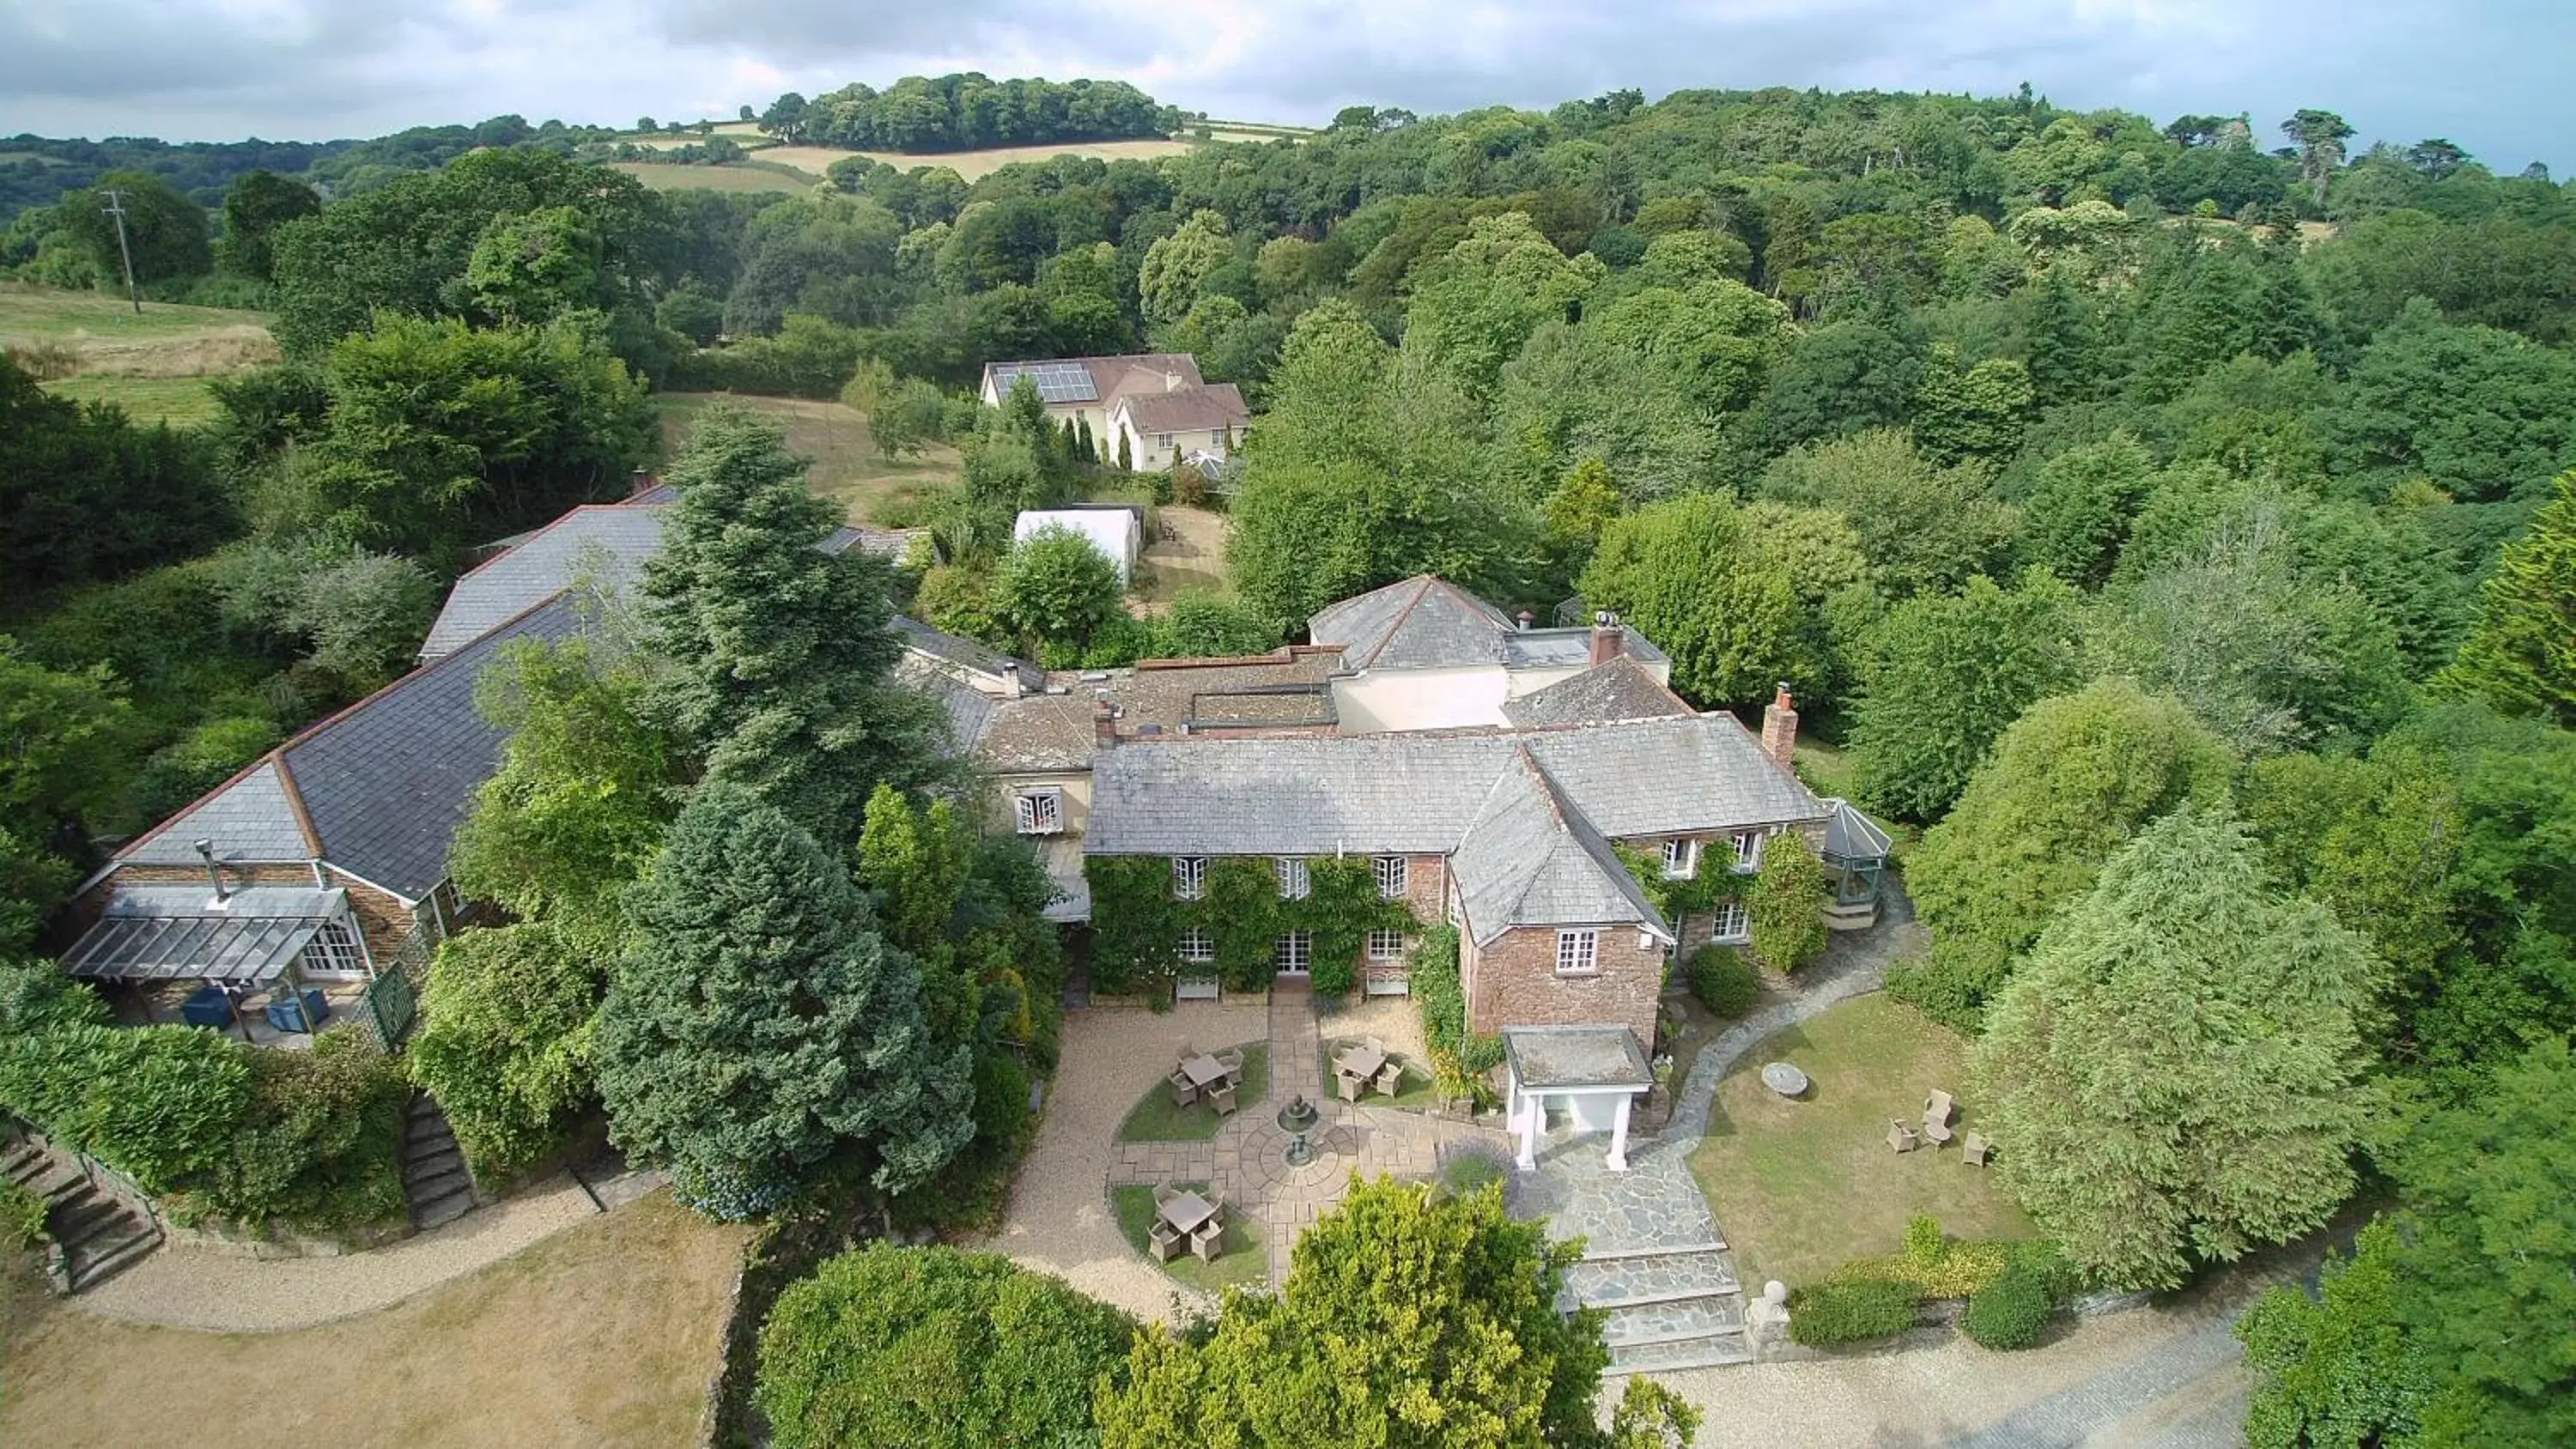 Bird's eye view in Boscundle Manor